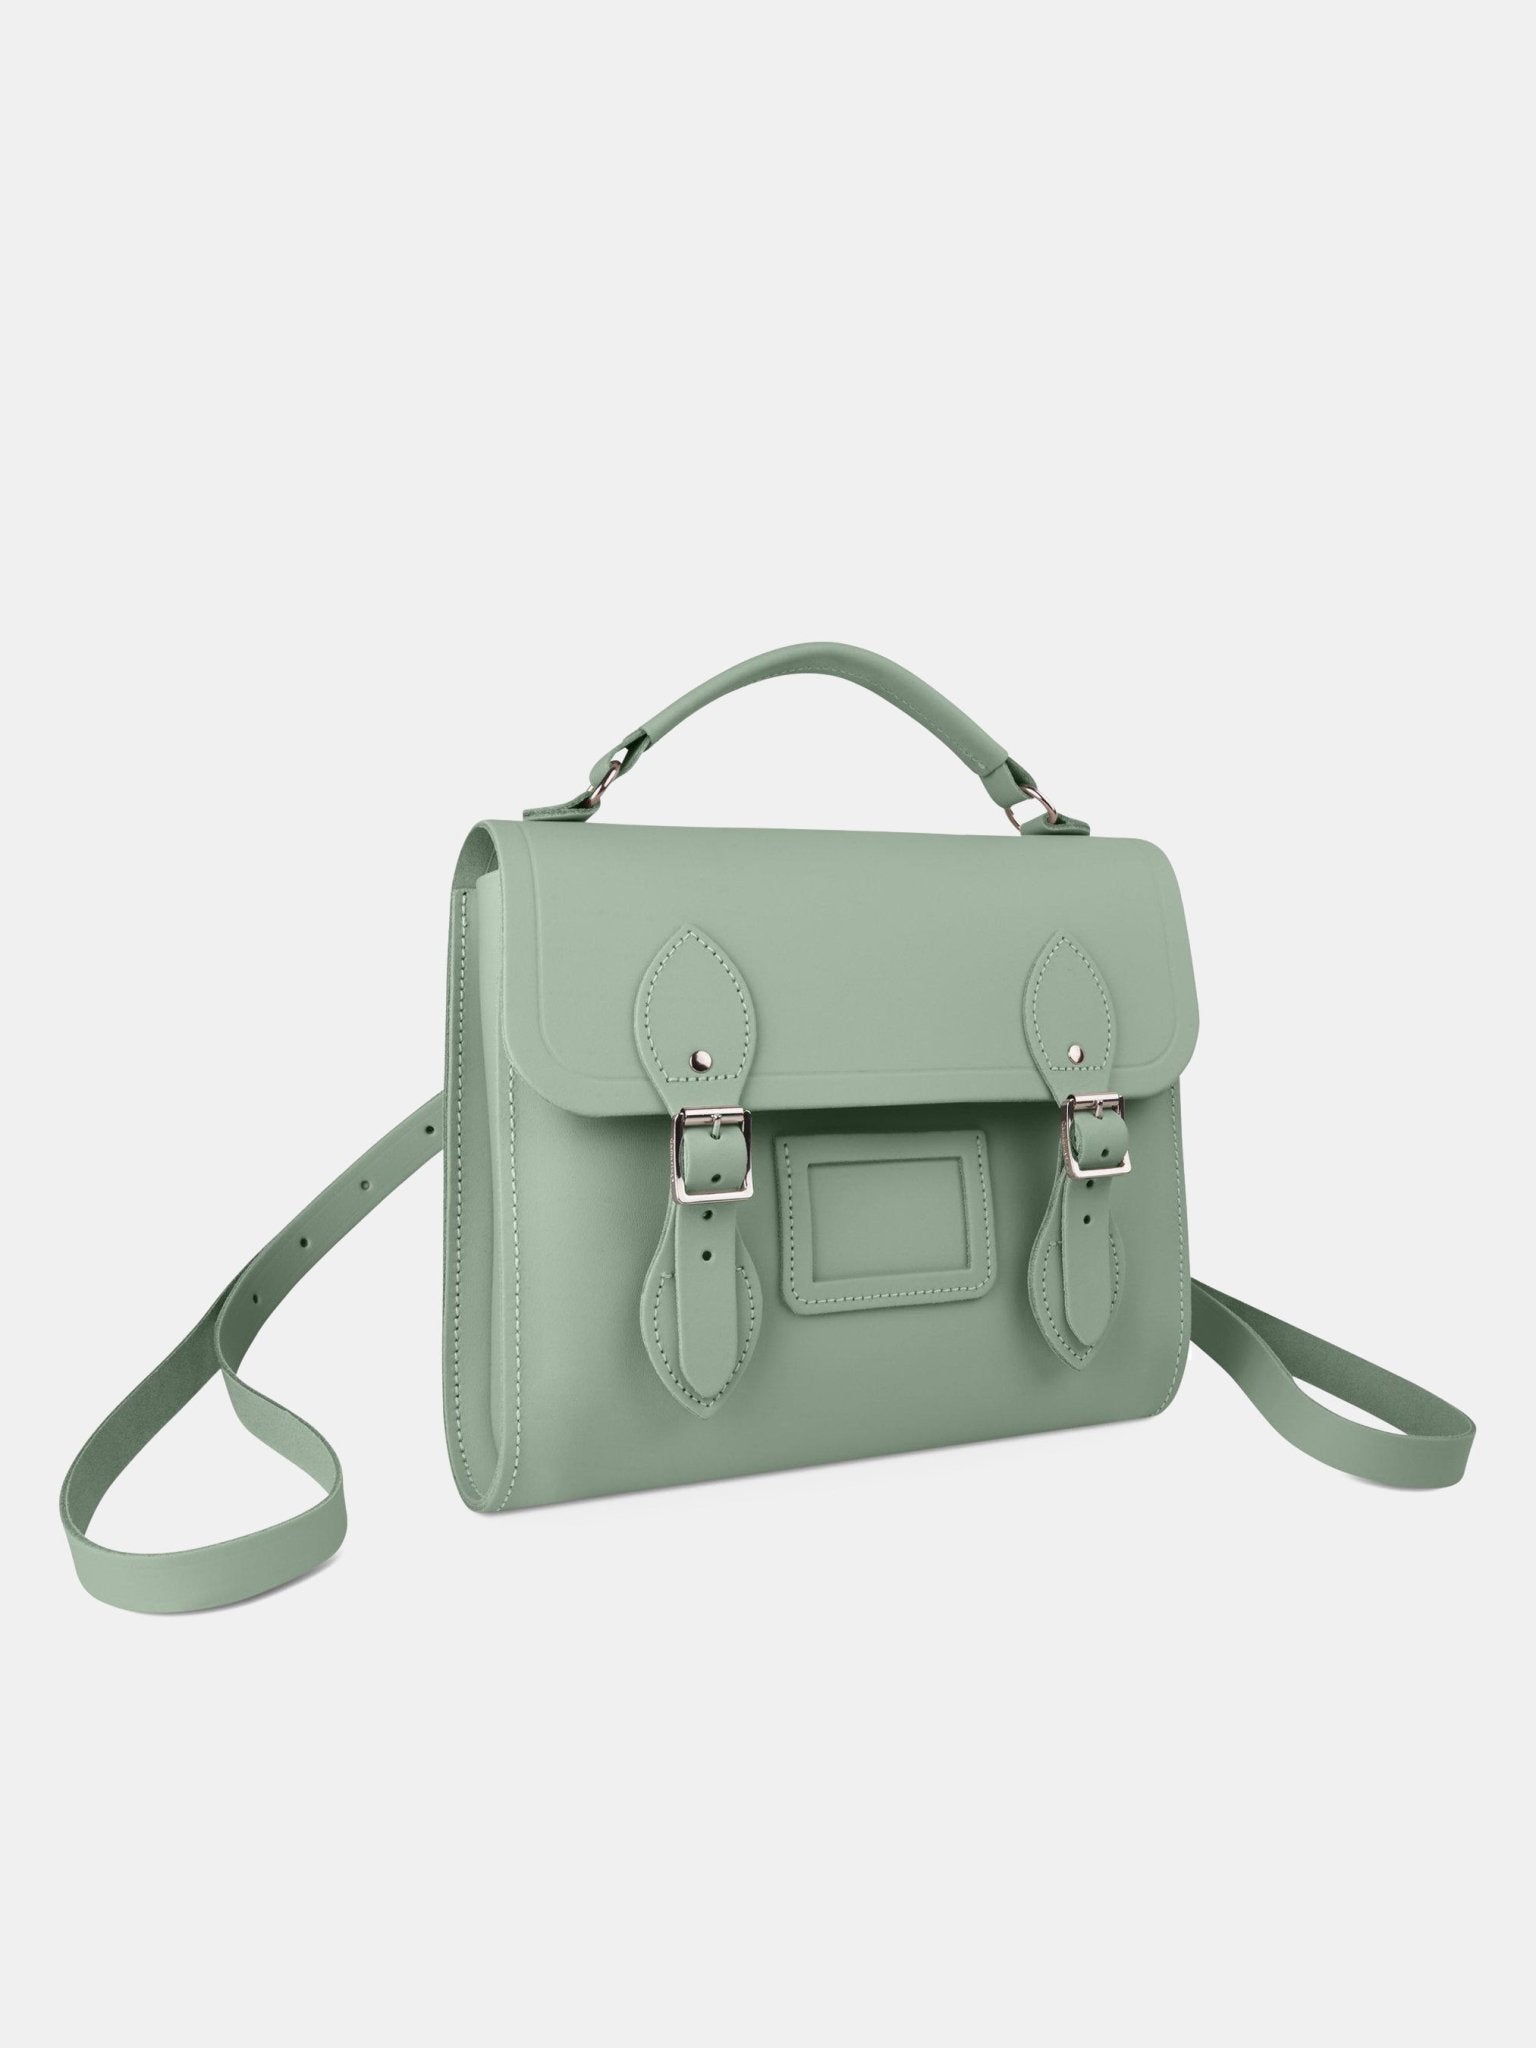 Barrel Backpack in Leather - Sabi Green - The Cambridge Satchel Company UK Store